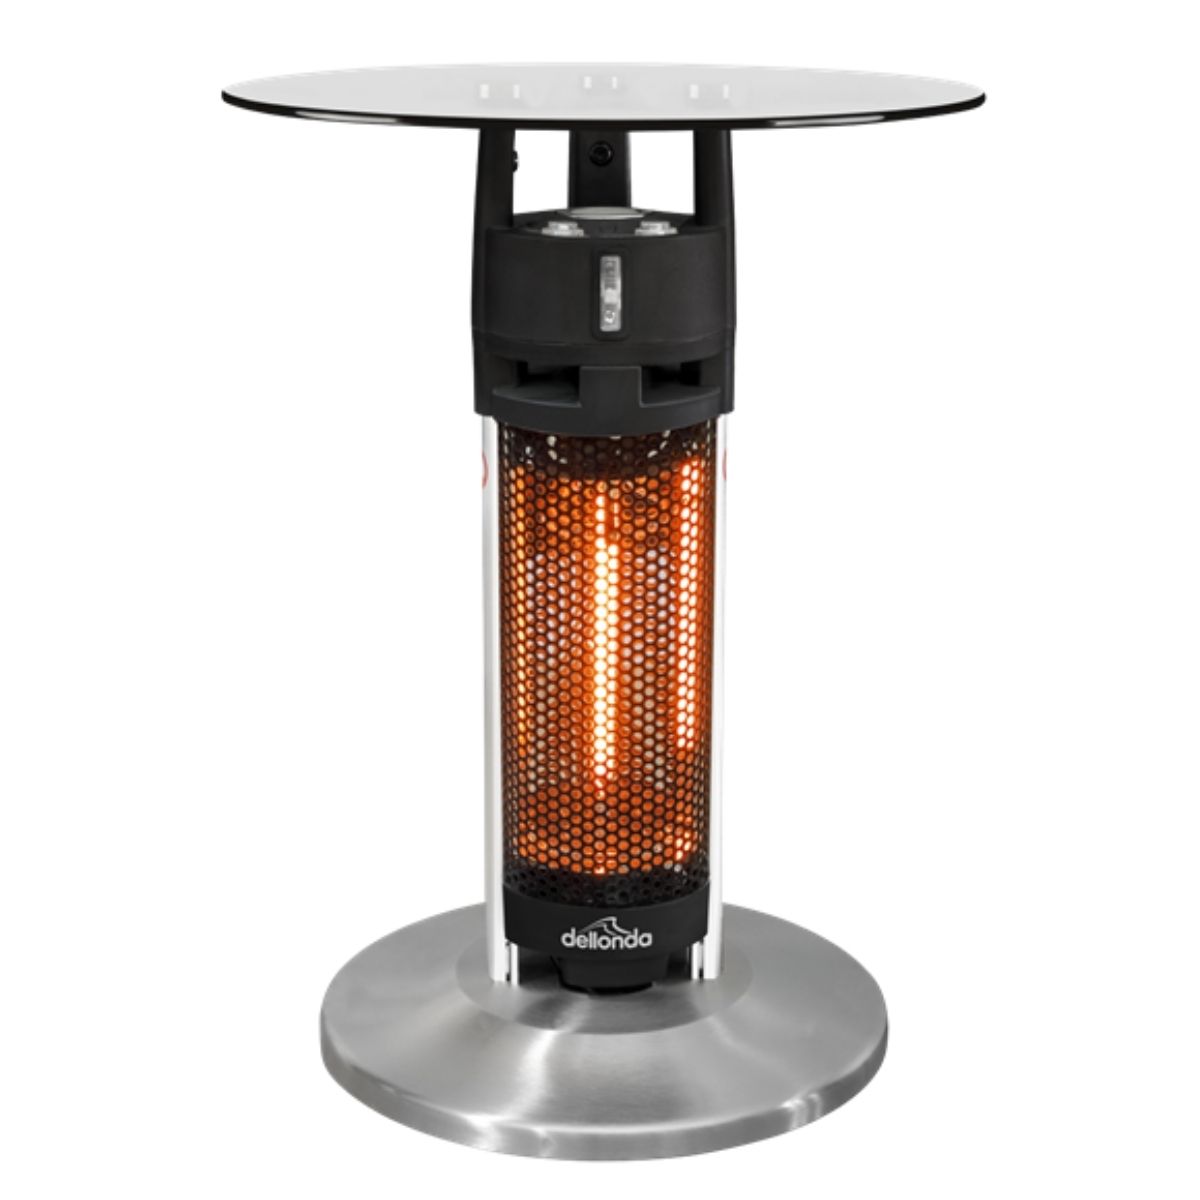 Dellonda DG62 Bistro Table with 1200W Heater Black/Stainless Steel